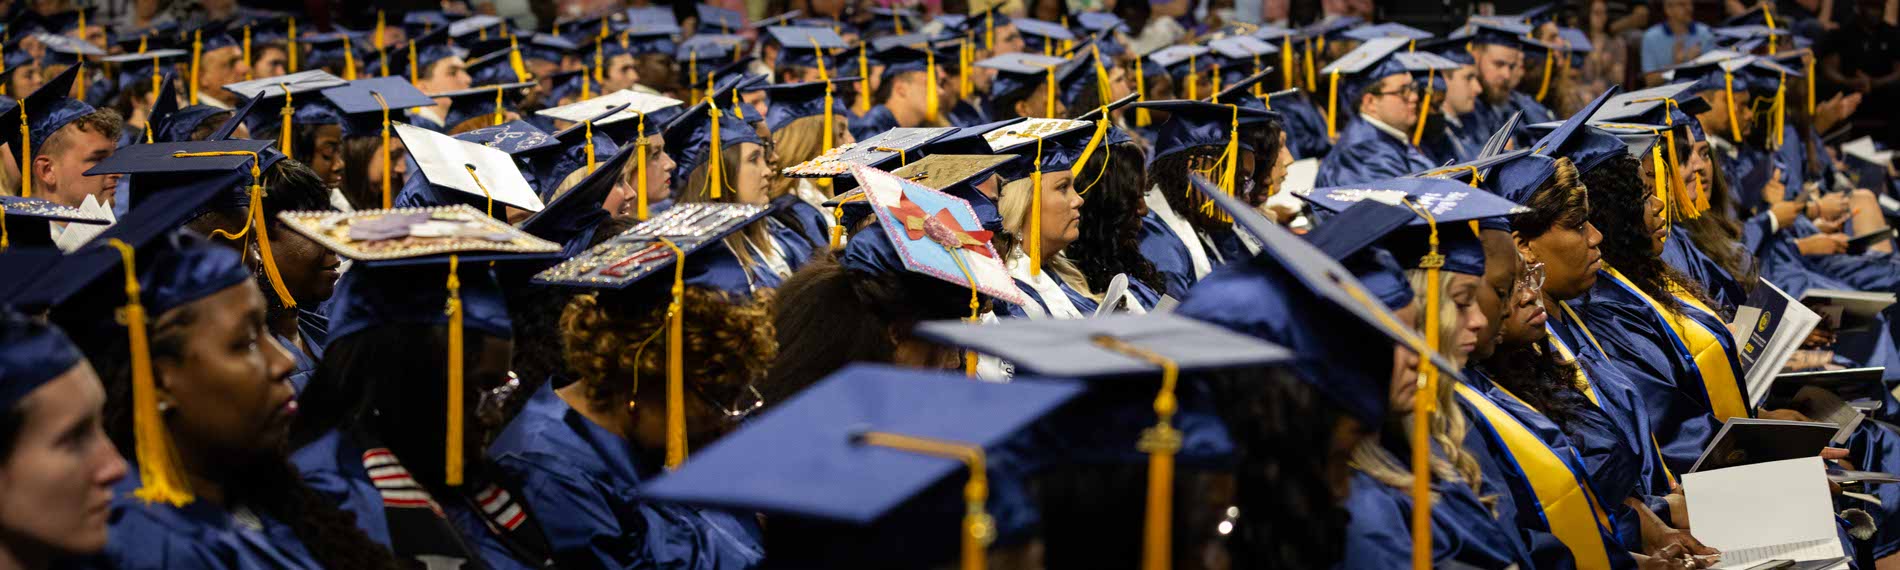 A large body of FDTC students sits at graduation in their caps and gowns.